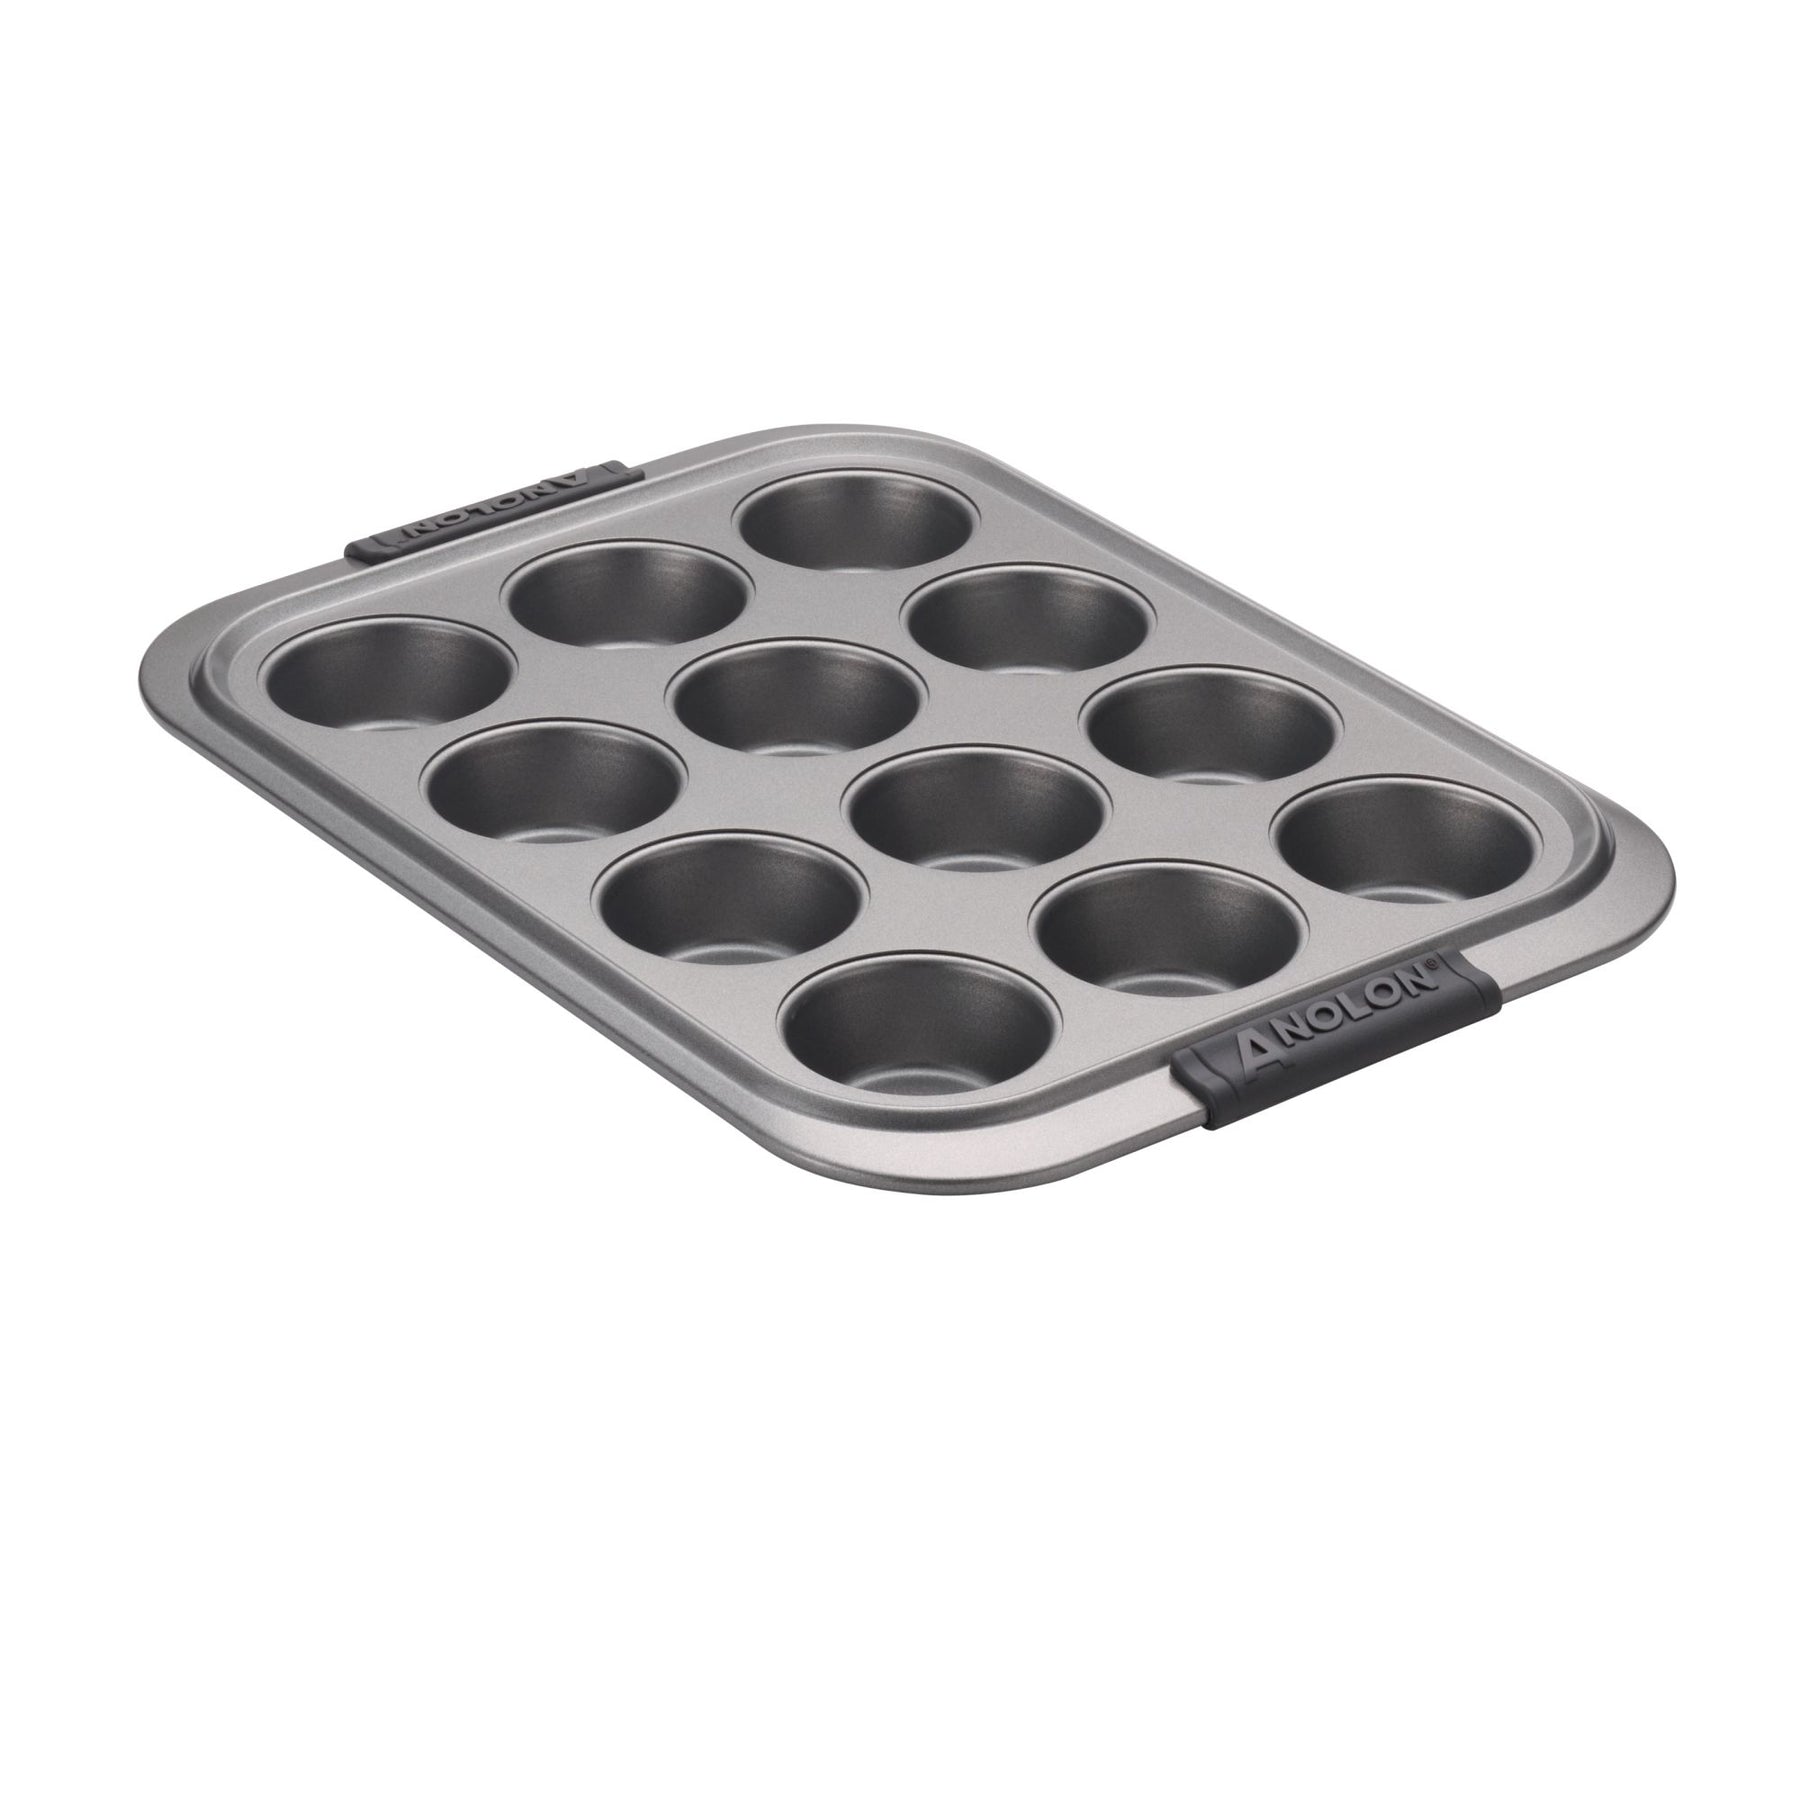 Taste Of Home Muffin Pan, Non-Stick, 12-Cup